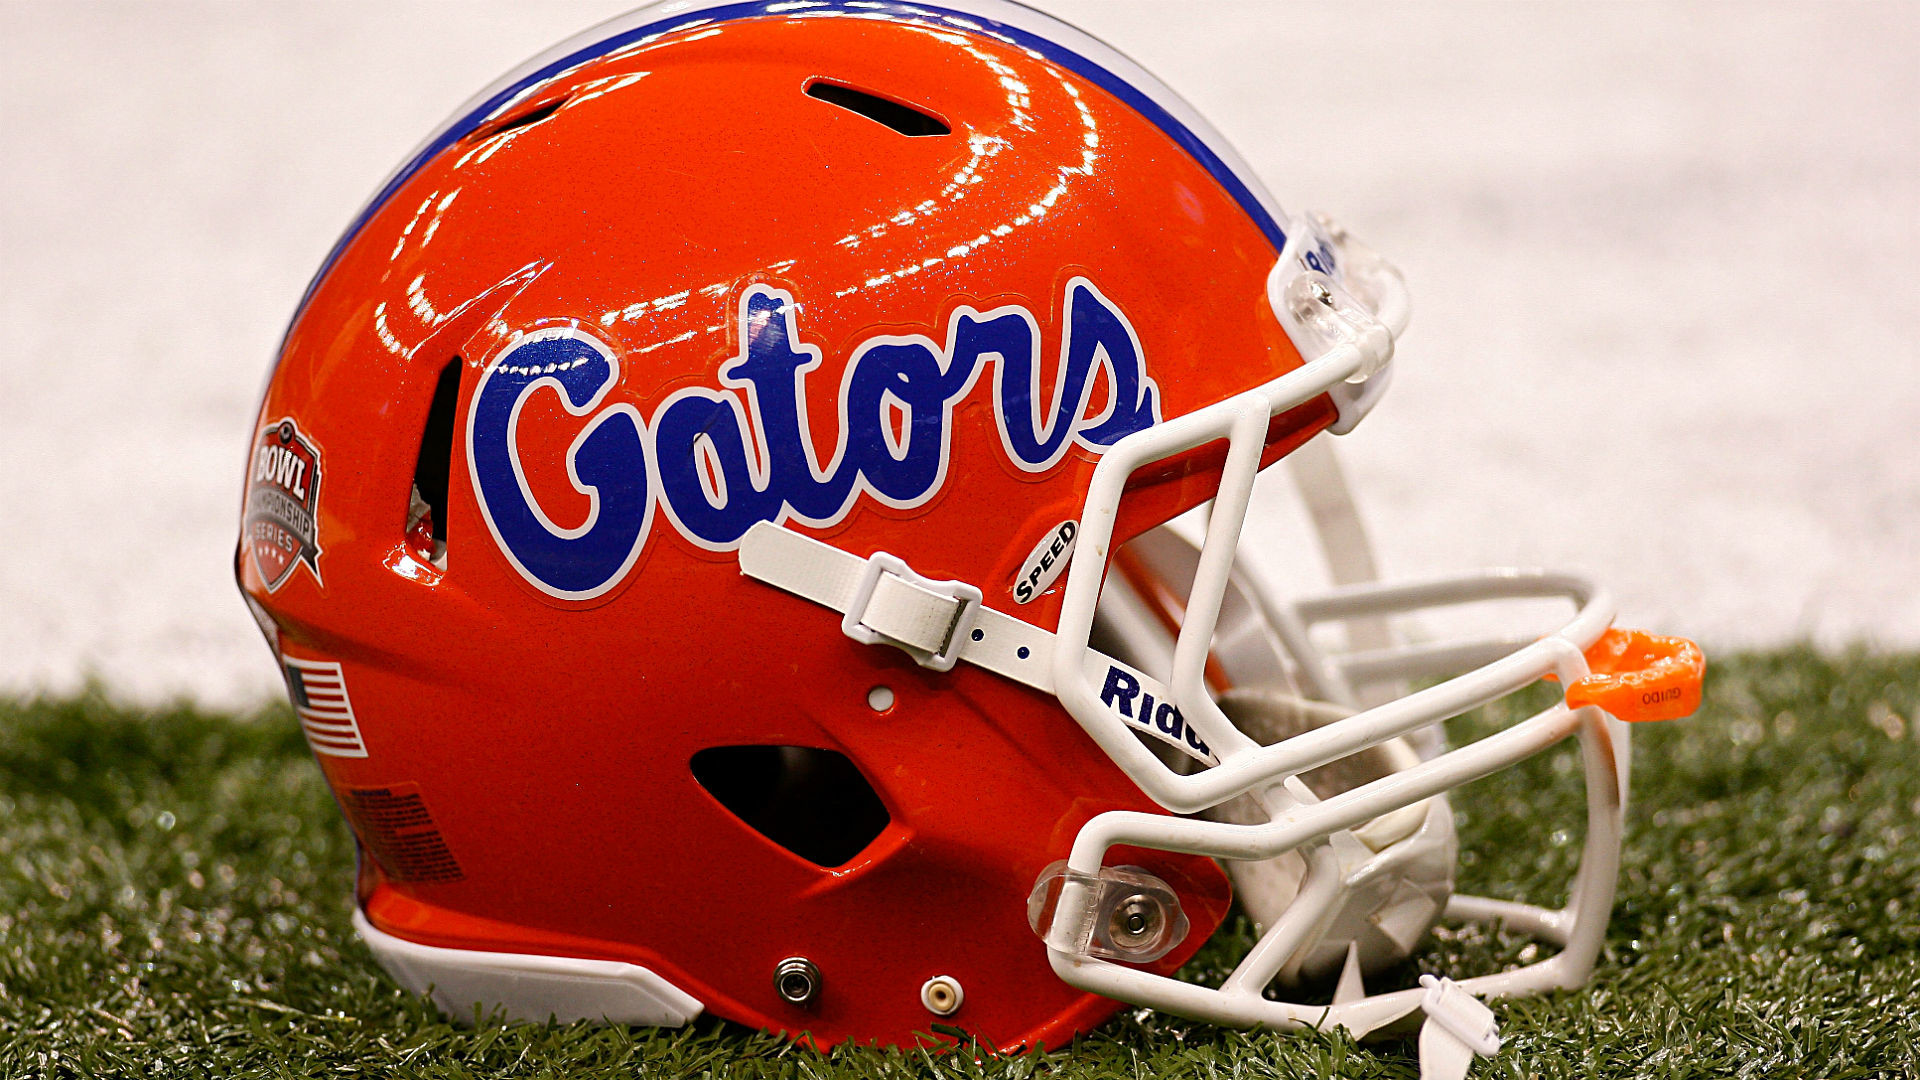 1920x1080 ... wallpaper  595496; backgrounds for florida gators florida  state background www ...